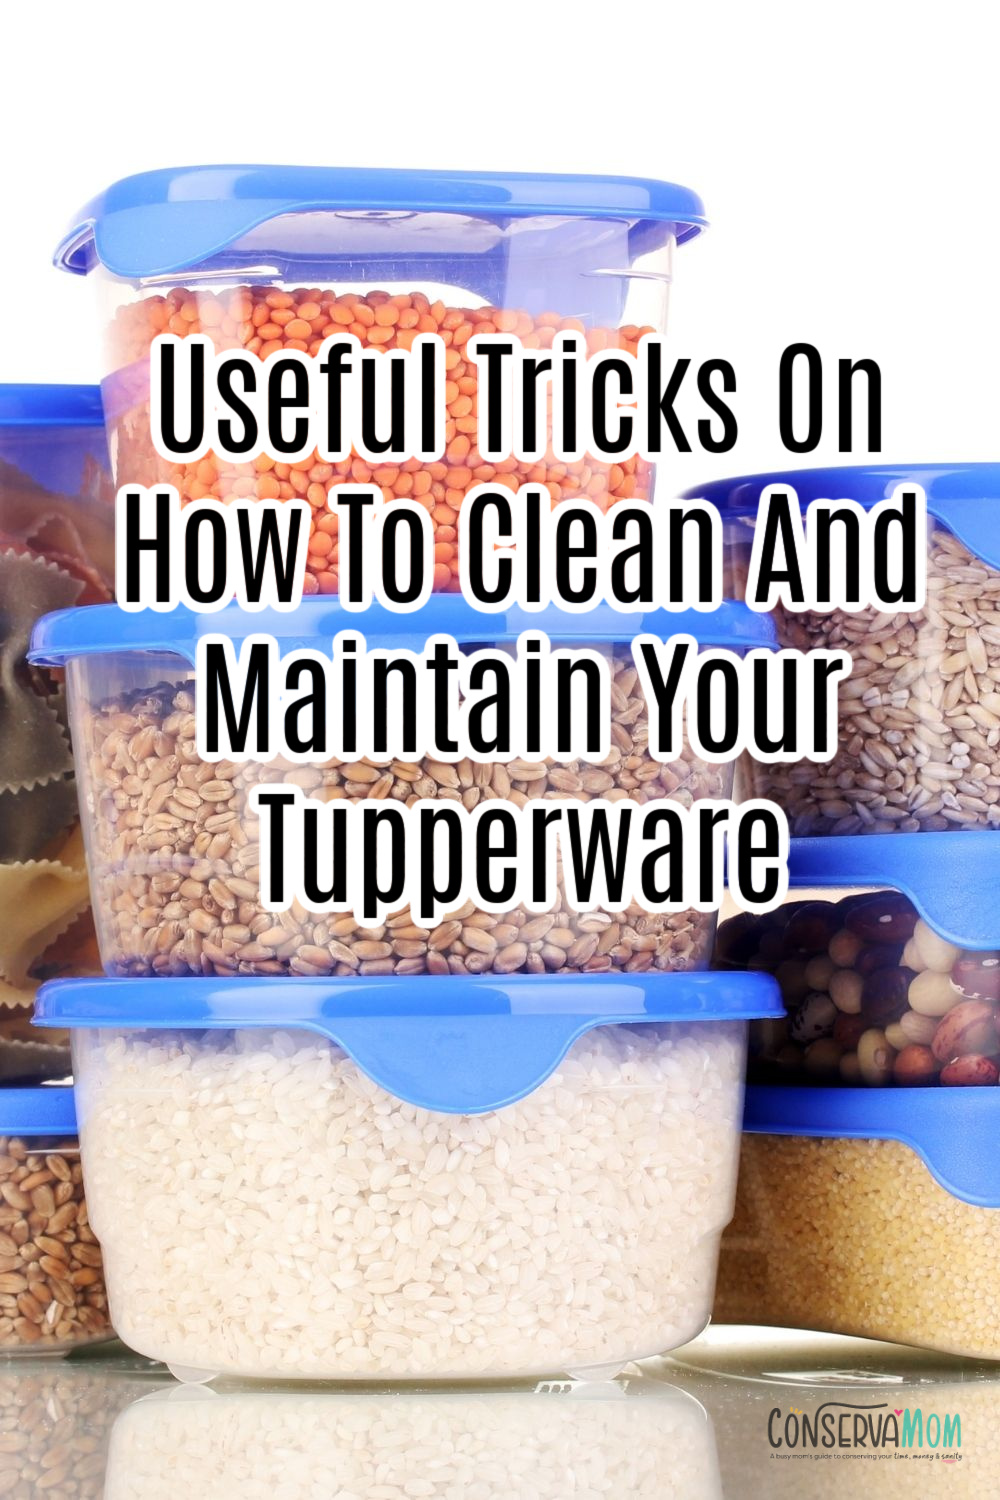 https://conservamome.com/wp-content/uploads/2022/03/Useful-Tricks-On-How-To-Clean-And-Maintain-Your-Tupperware-2.jpg